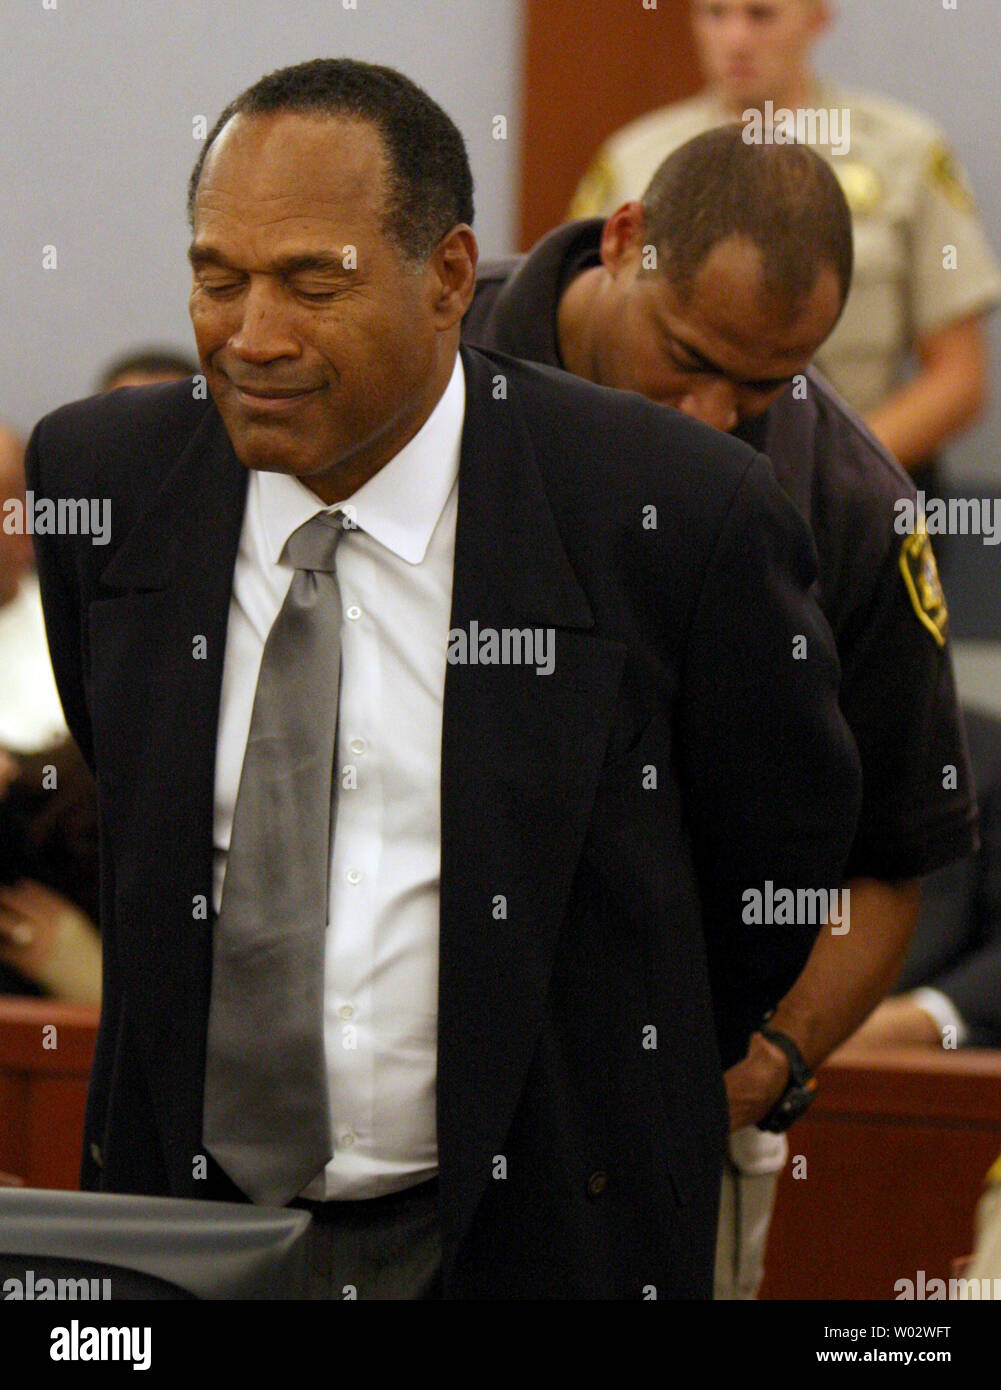 O.J. Simpson is taken into custody after being found guilty on all 12 charges, including felony kidnapping, armed robbery and conspiracy at the Clark County Regional Justice Center in Las Vegas, Nevada on October 3, 2008. The verdict comes 13 years to the day after Simpson was acquitted of murdering his ex-wife Nicole Brown Simpson and Ron Goldman. (UPI Photo/Daniel Gluskoter) Stock Photo